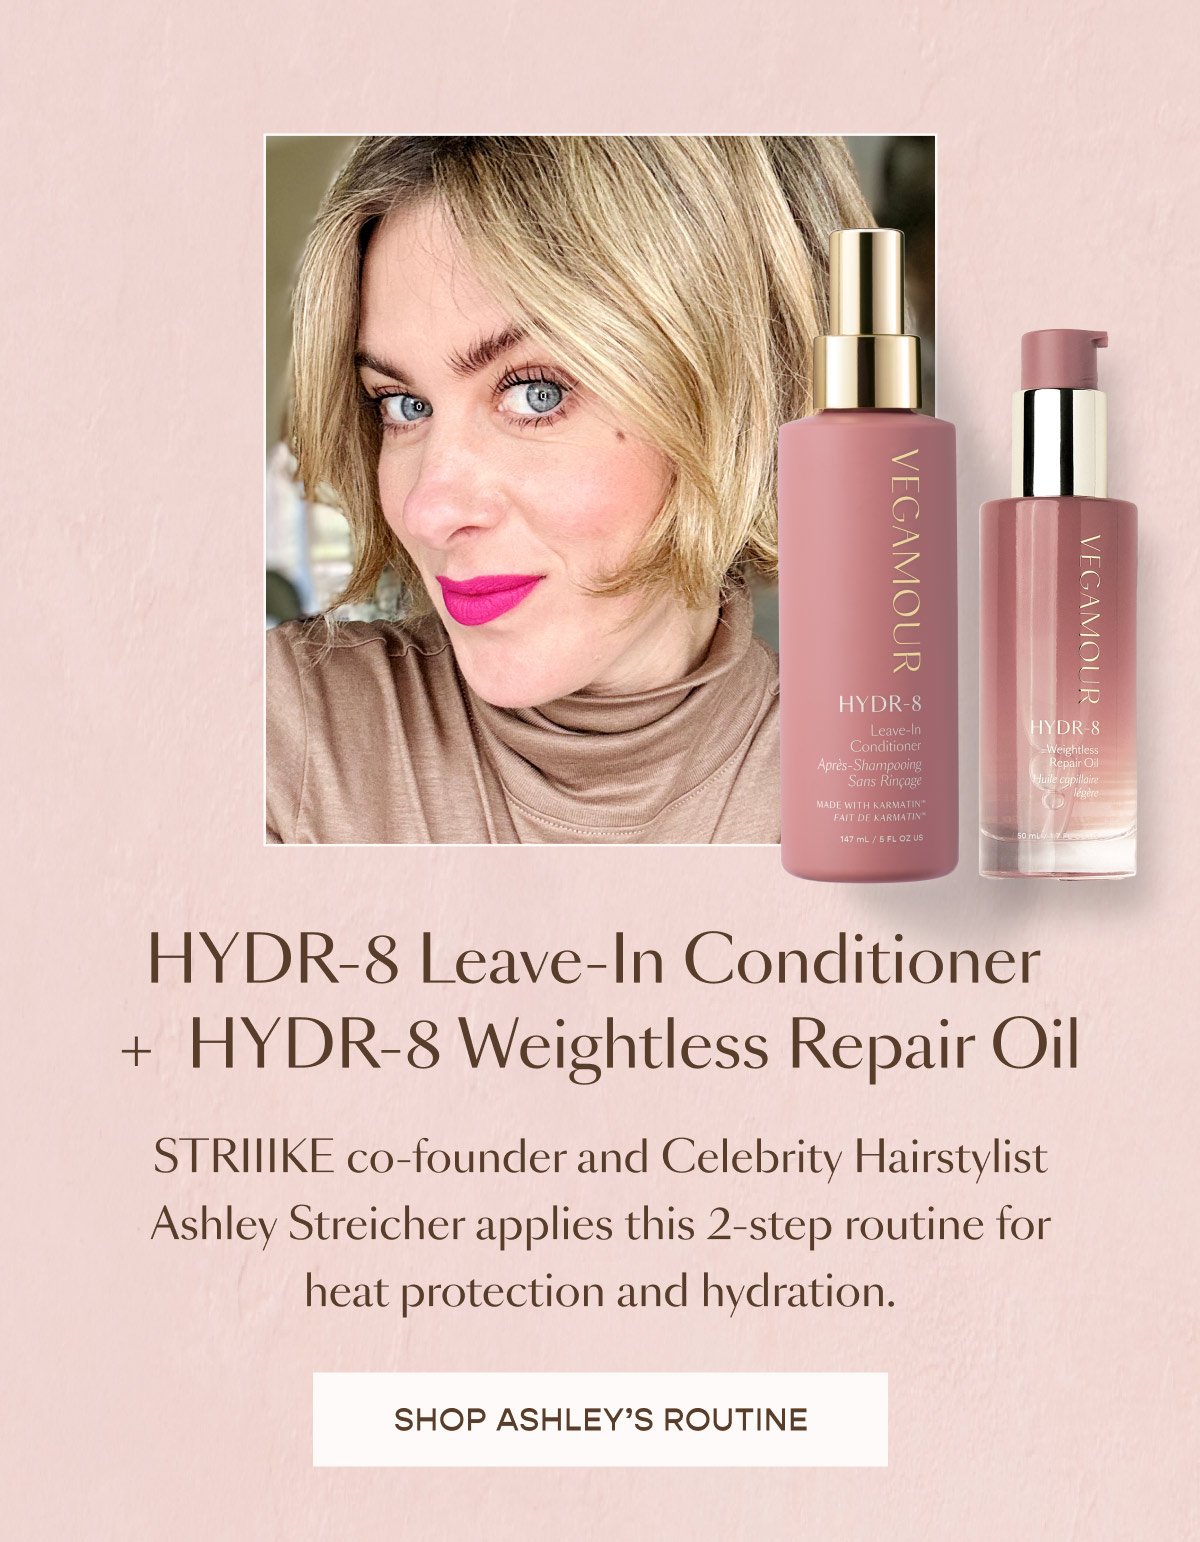 HYDR-8 Leave-In Conditioner + HYDR-8 Weightless Repair Oil